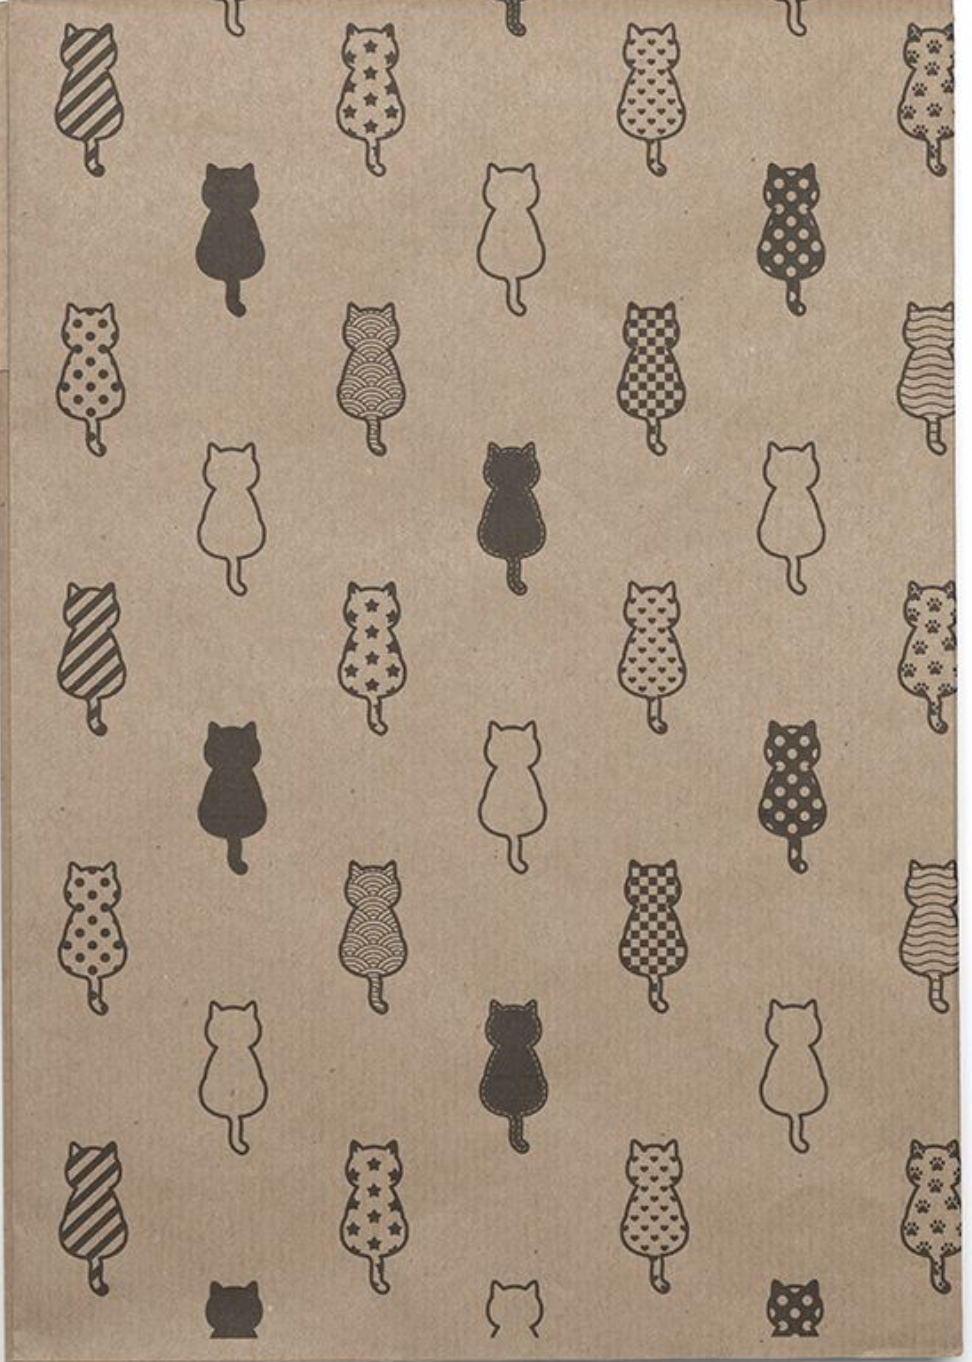 Kraft Cat Wrapping Paper